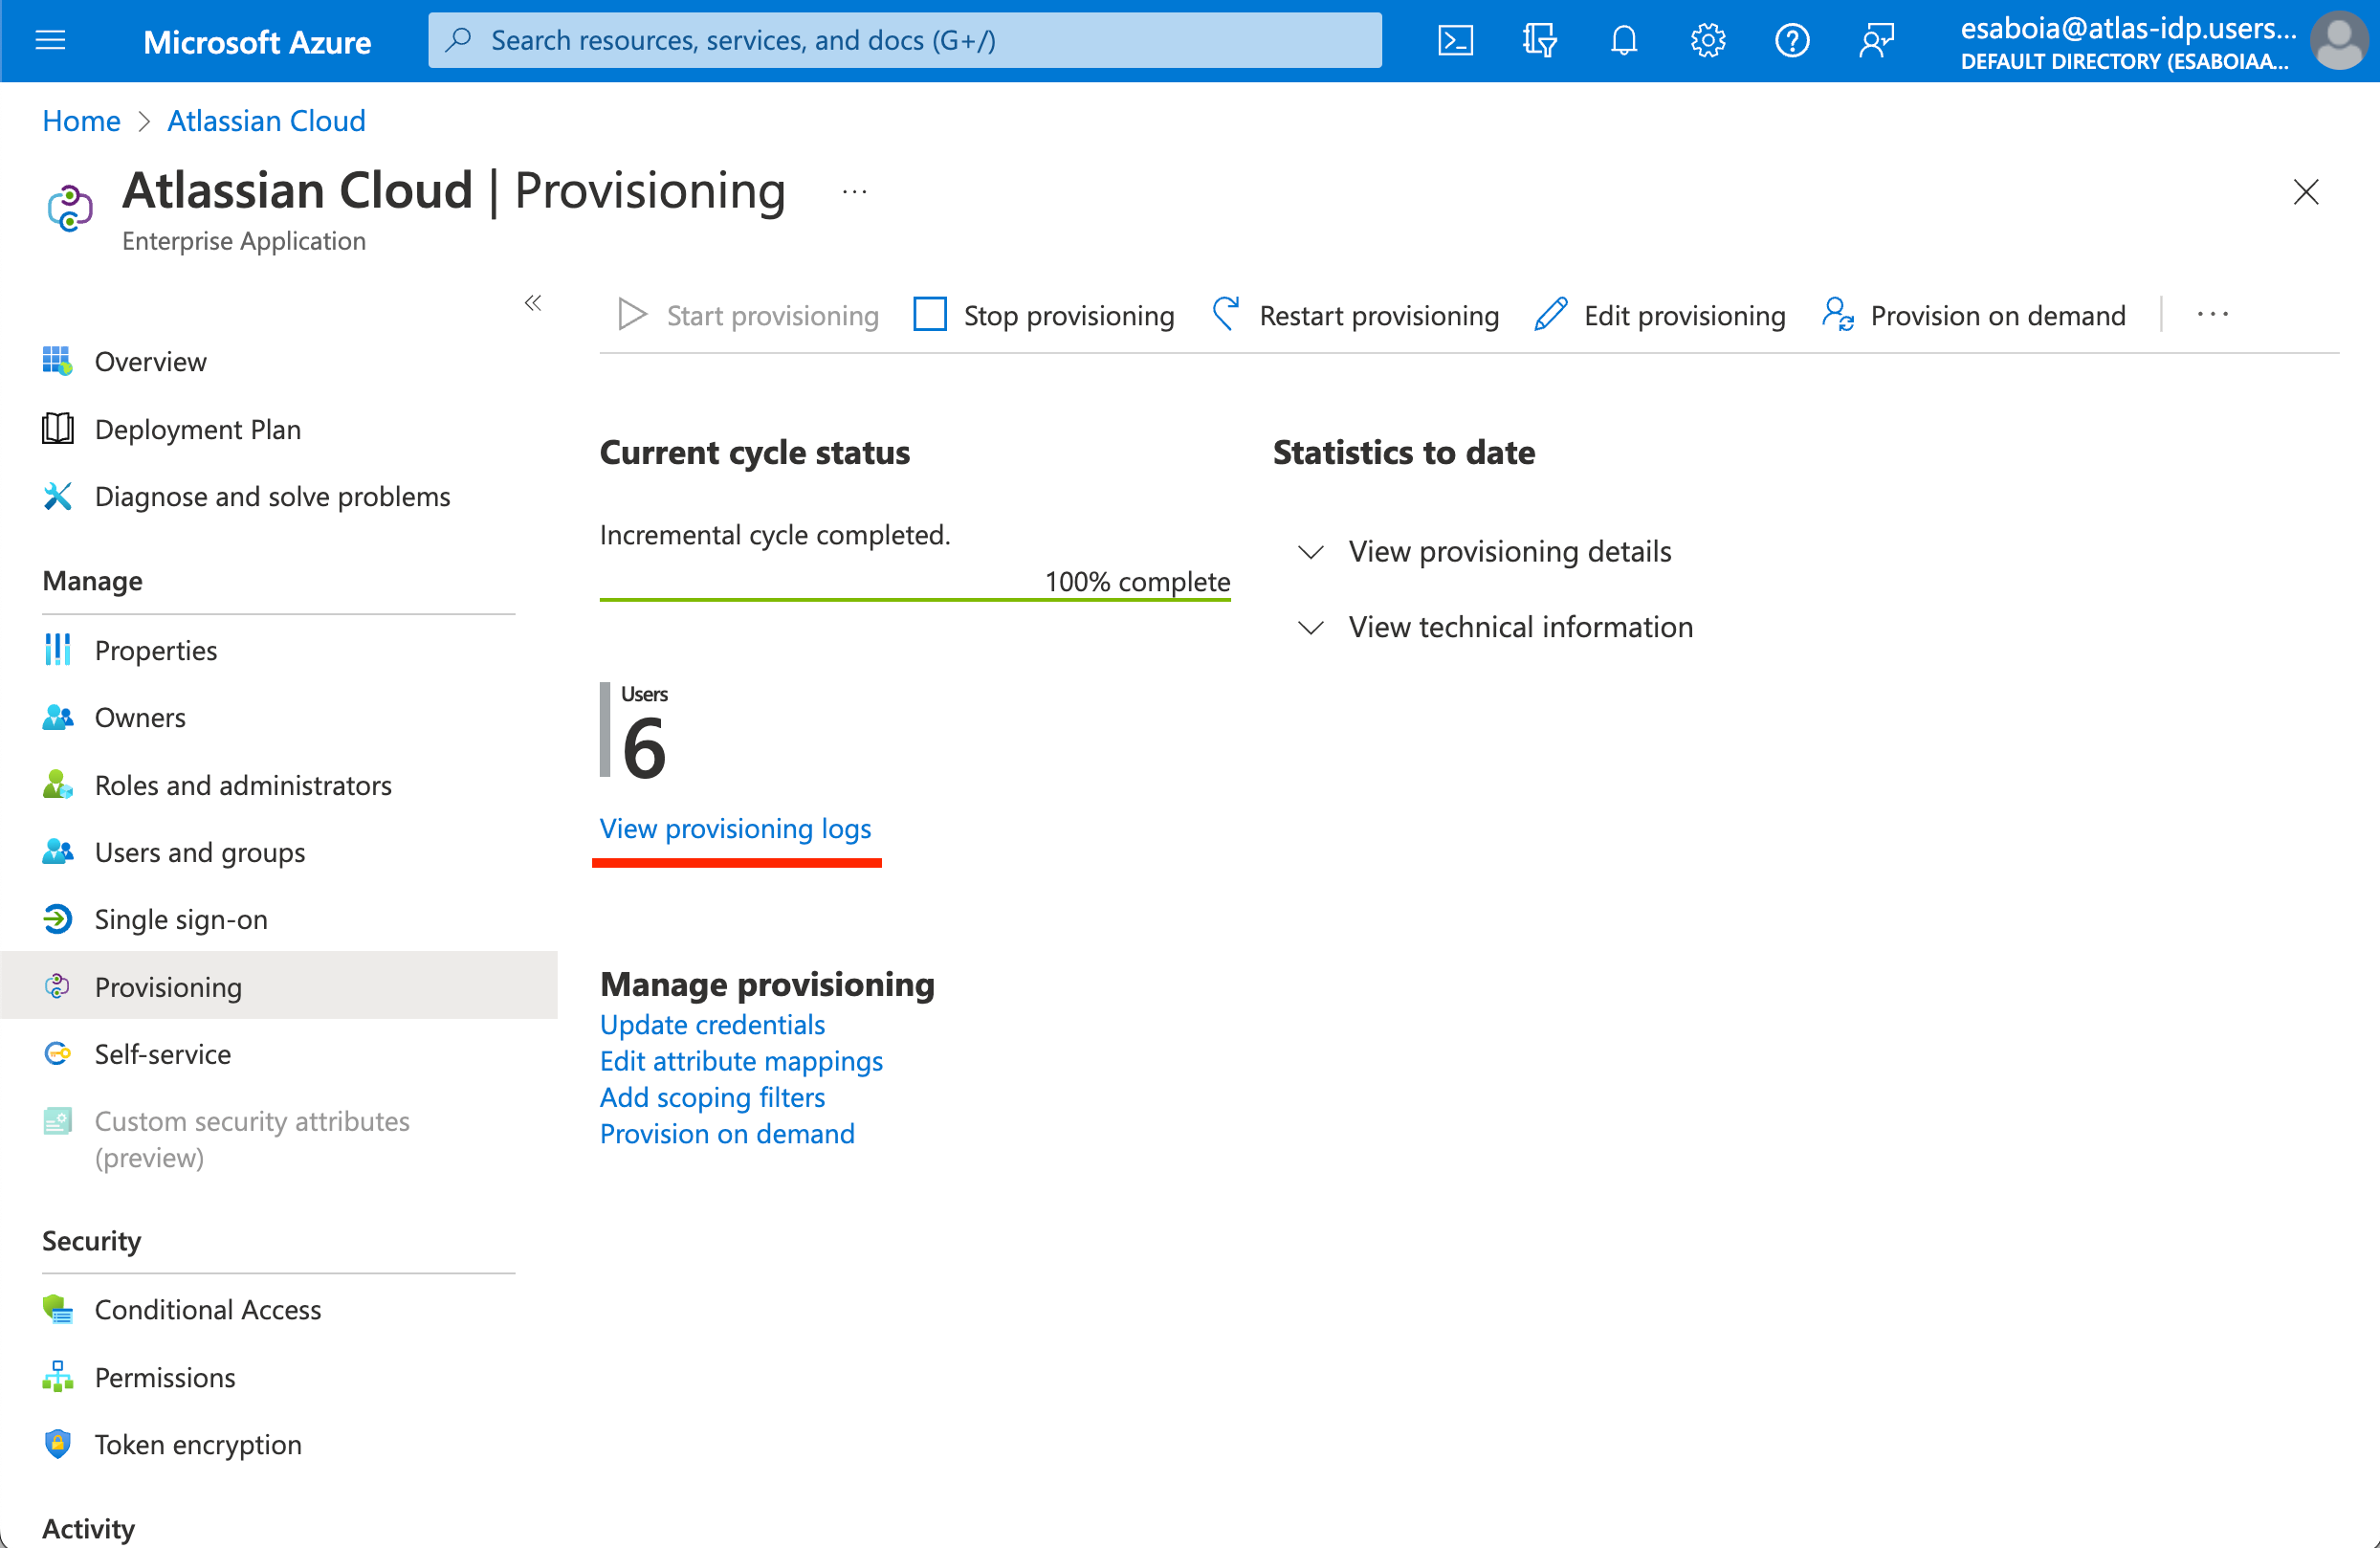 Azure AD showing the provisioning tab for Atlassian Cloud